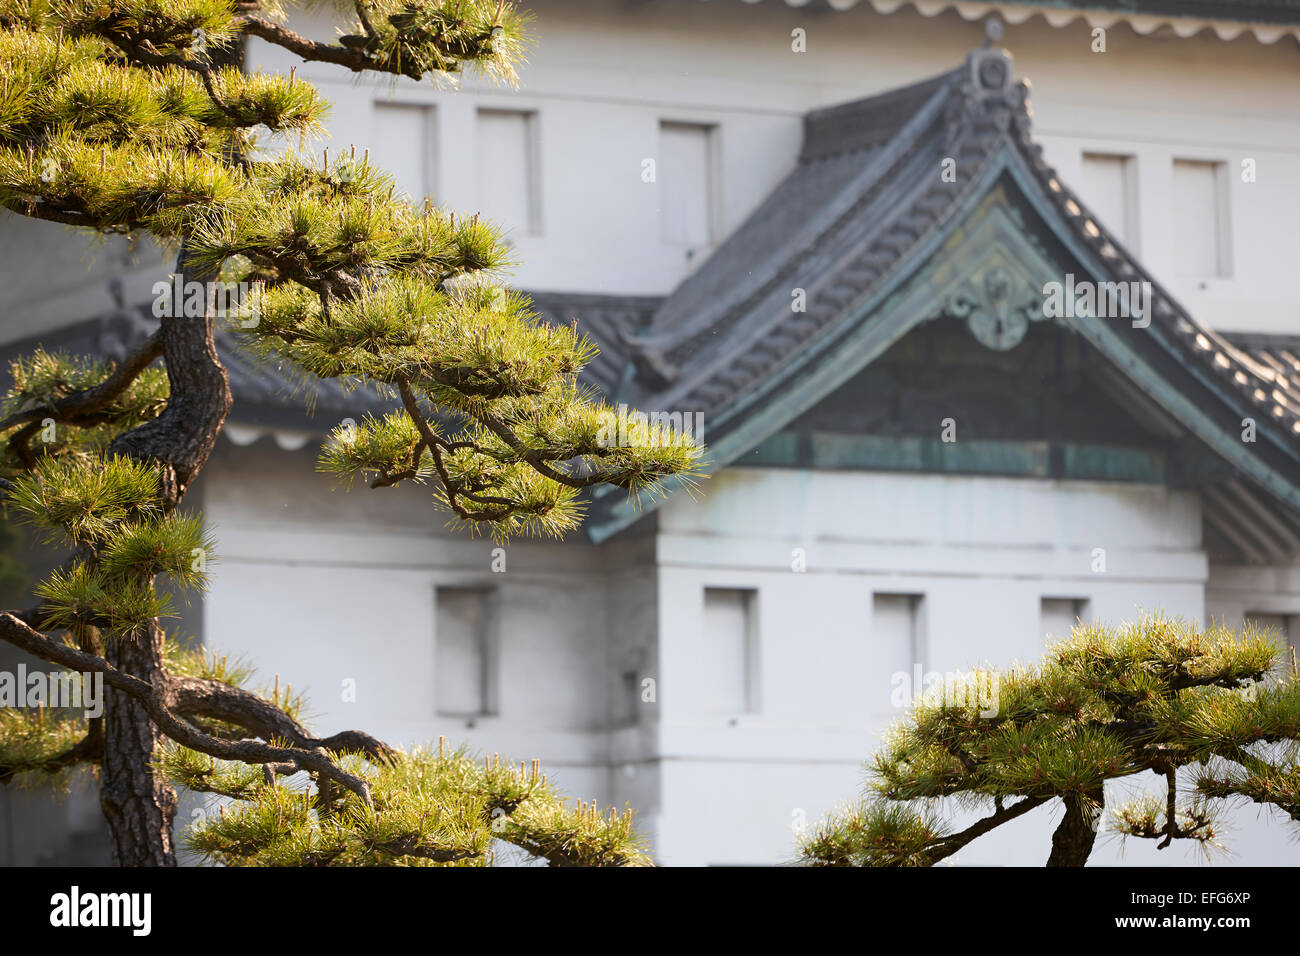 Japanese Black Pine Tree in front of Imperial Palace building, Tokyo, Japan Stock Photo